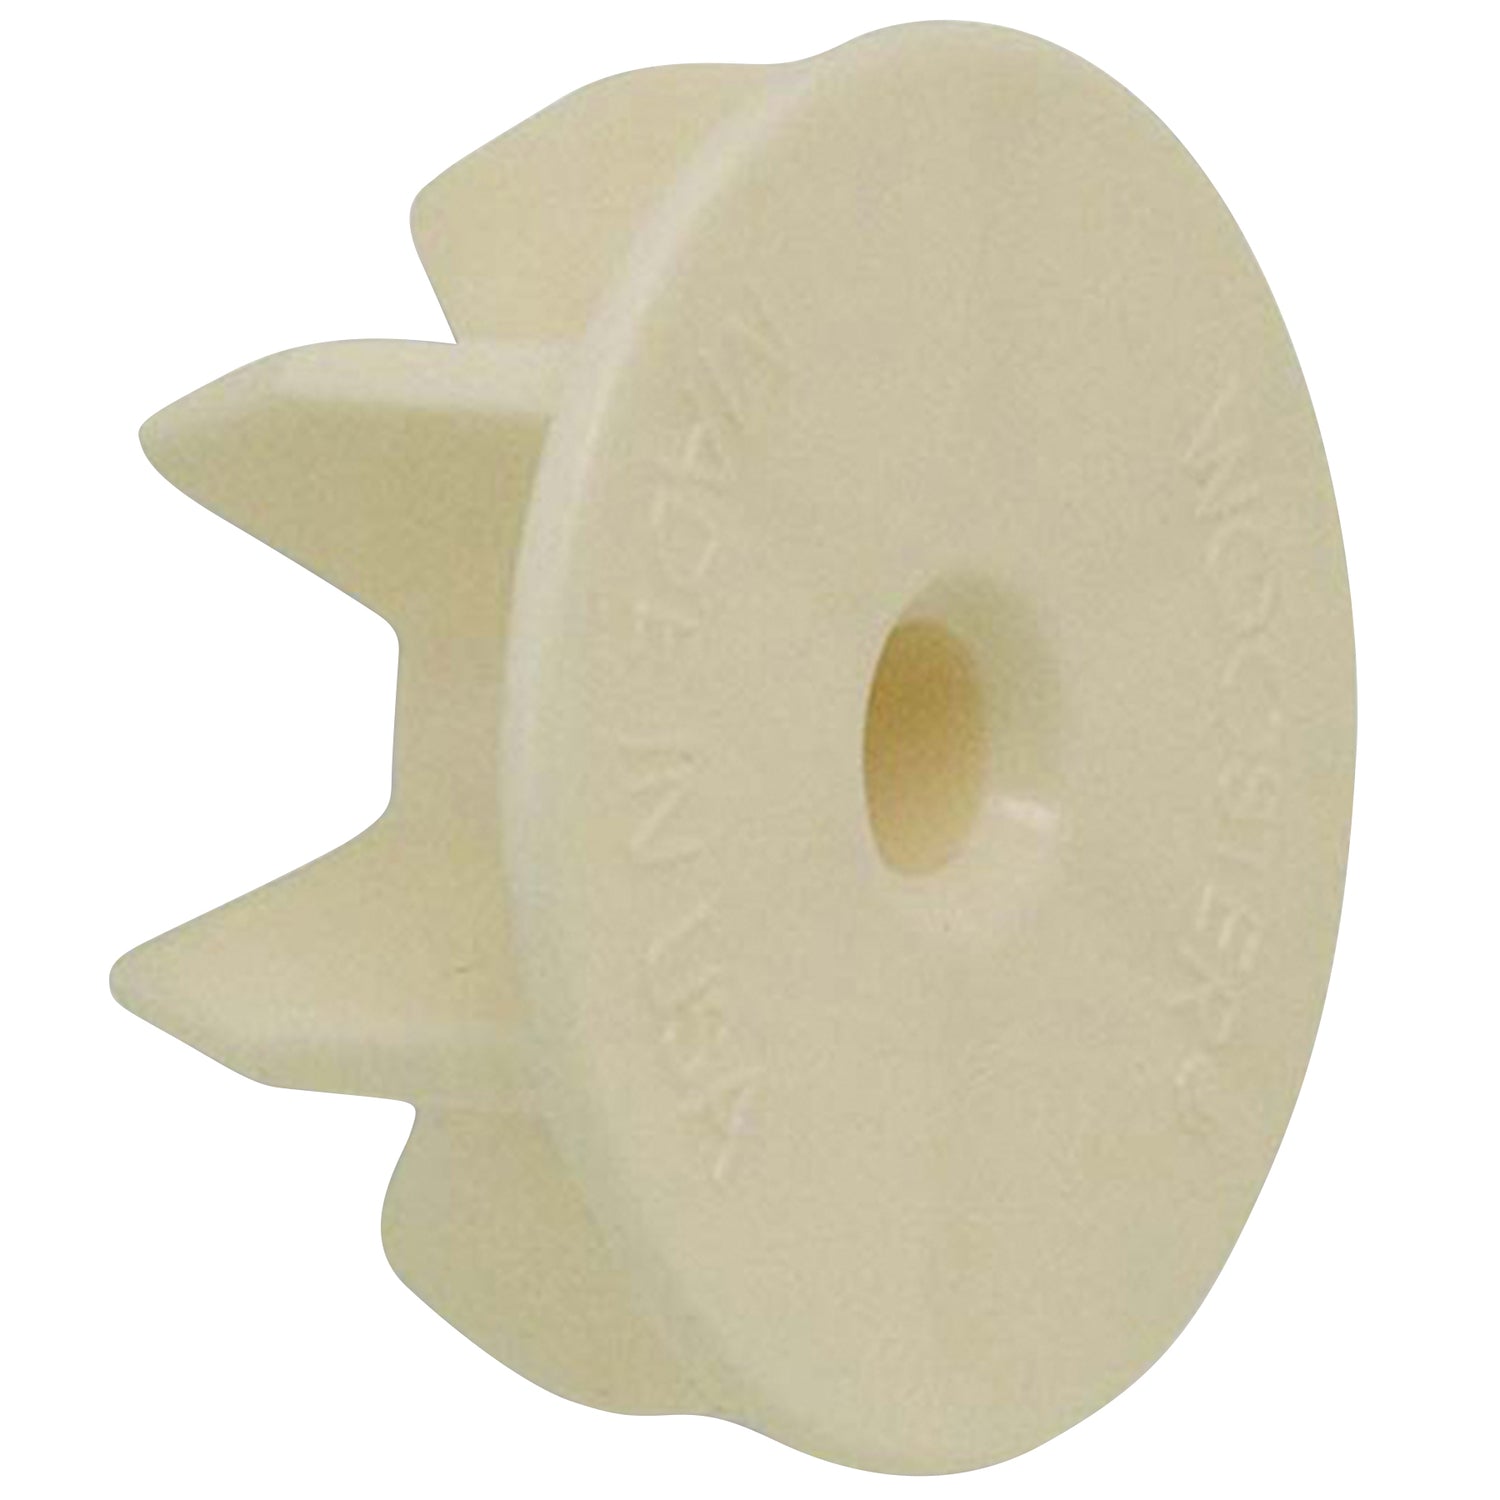 End Caps for Paint Roller Sleeves (2 Pack)